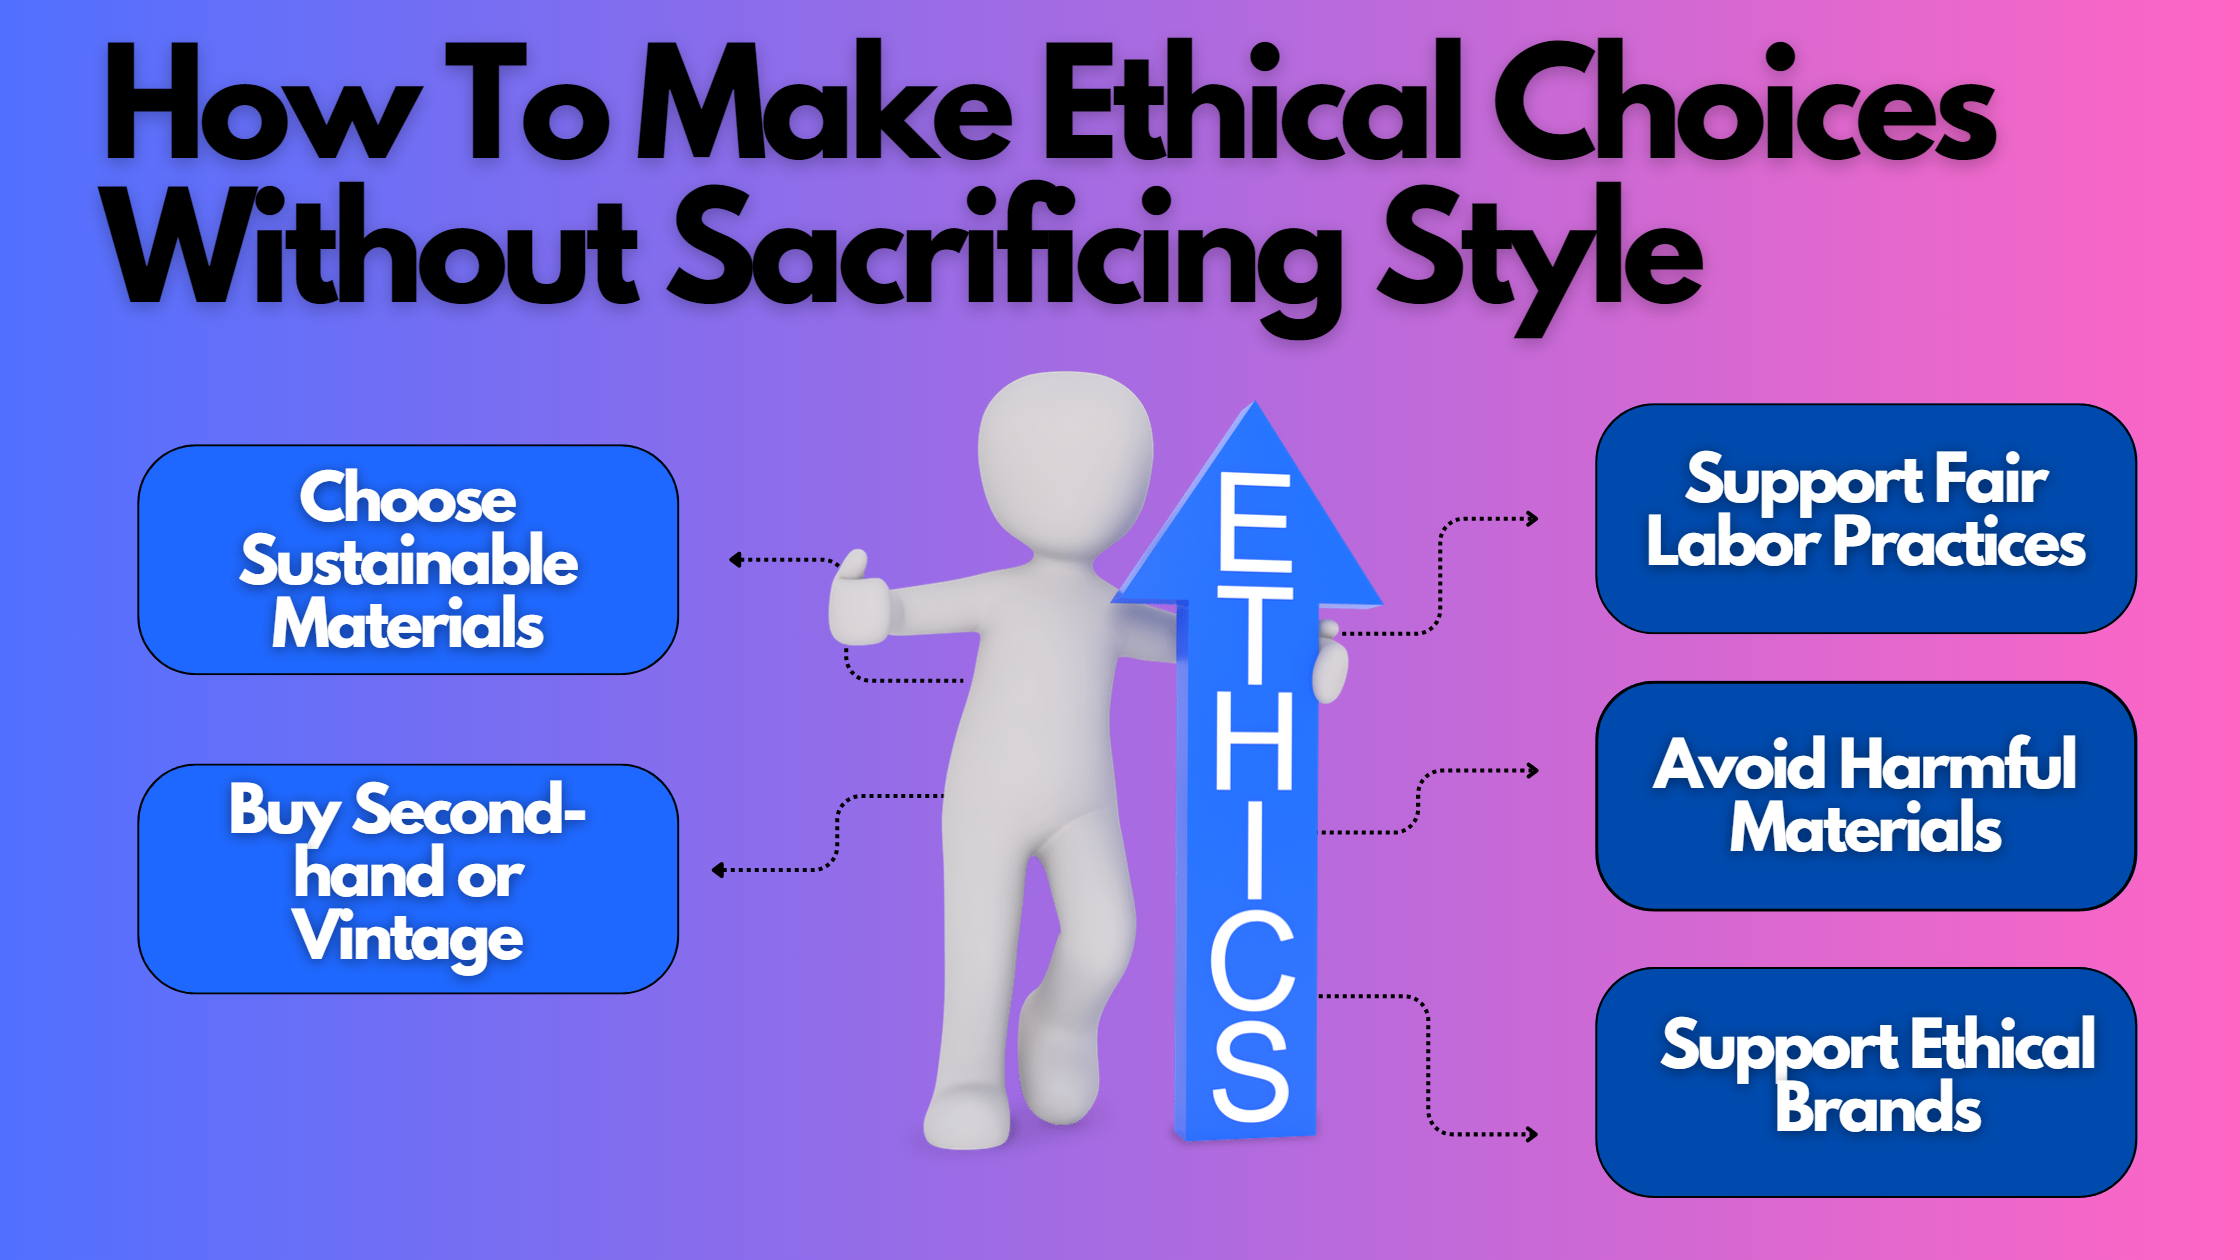 How To Make Ethical Choices Without Sacrificing Style